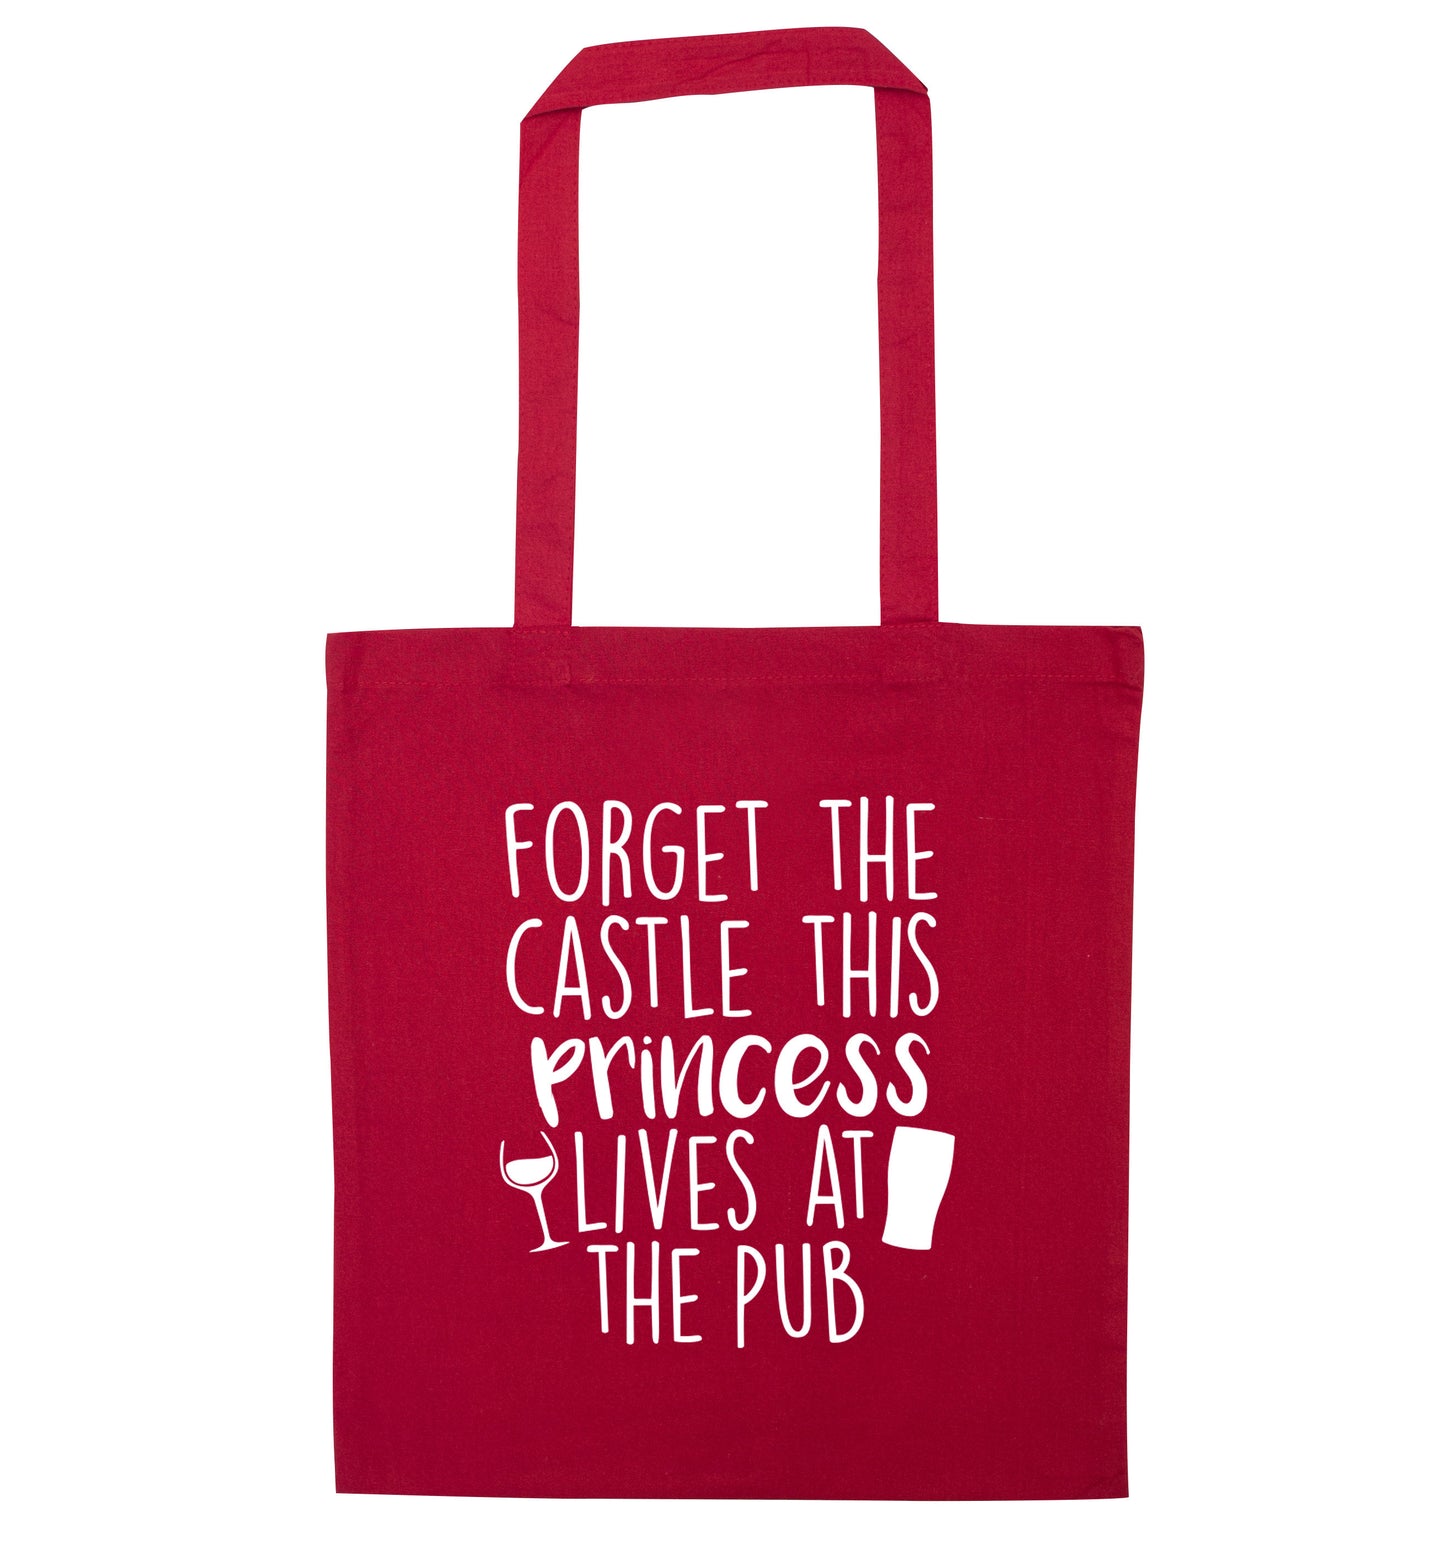 Forget the castle this princess lives at the pub red tote bag